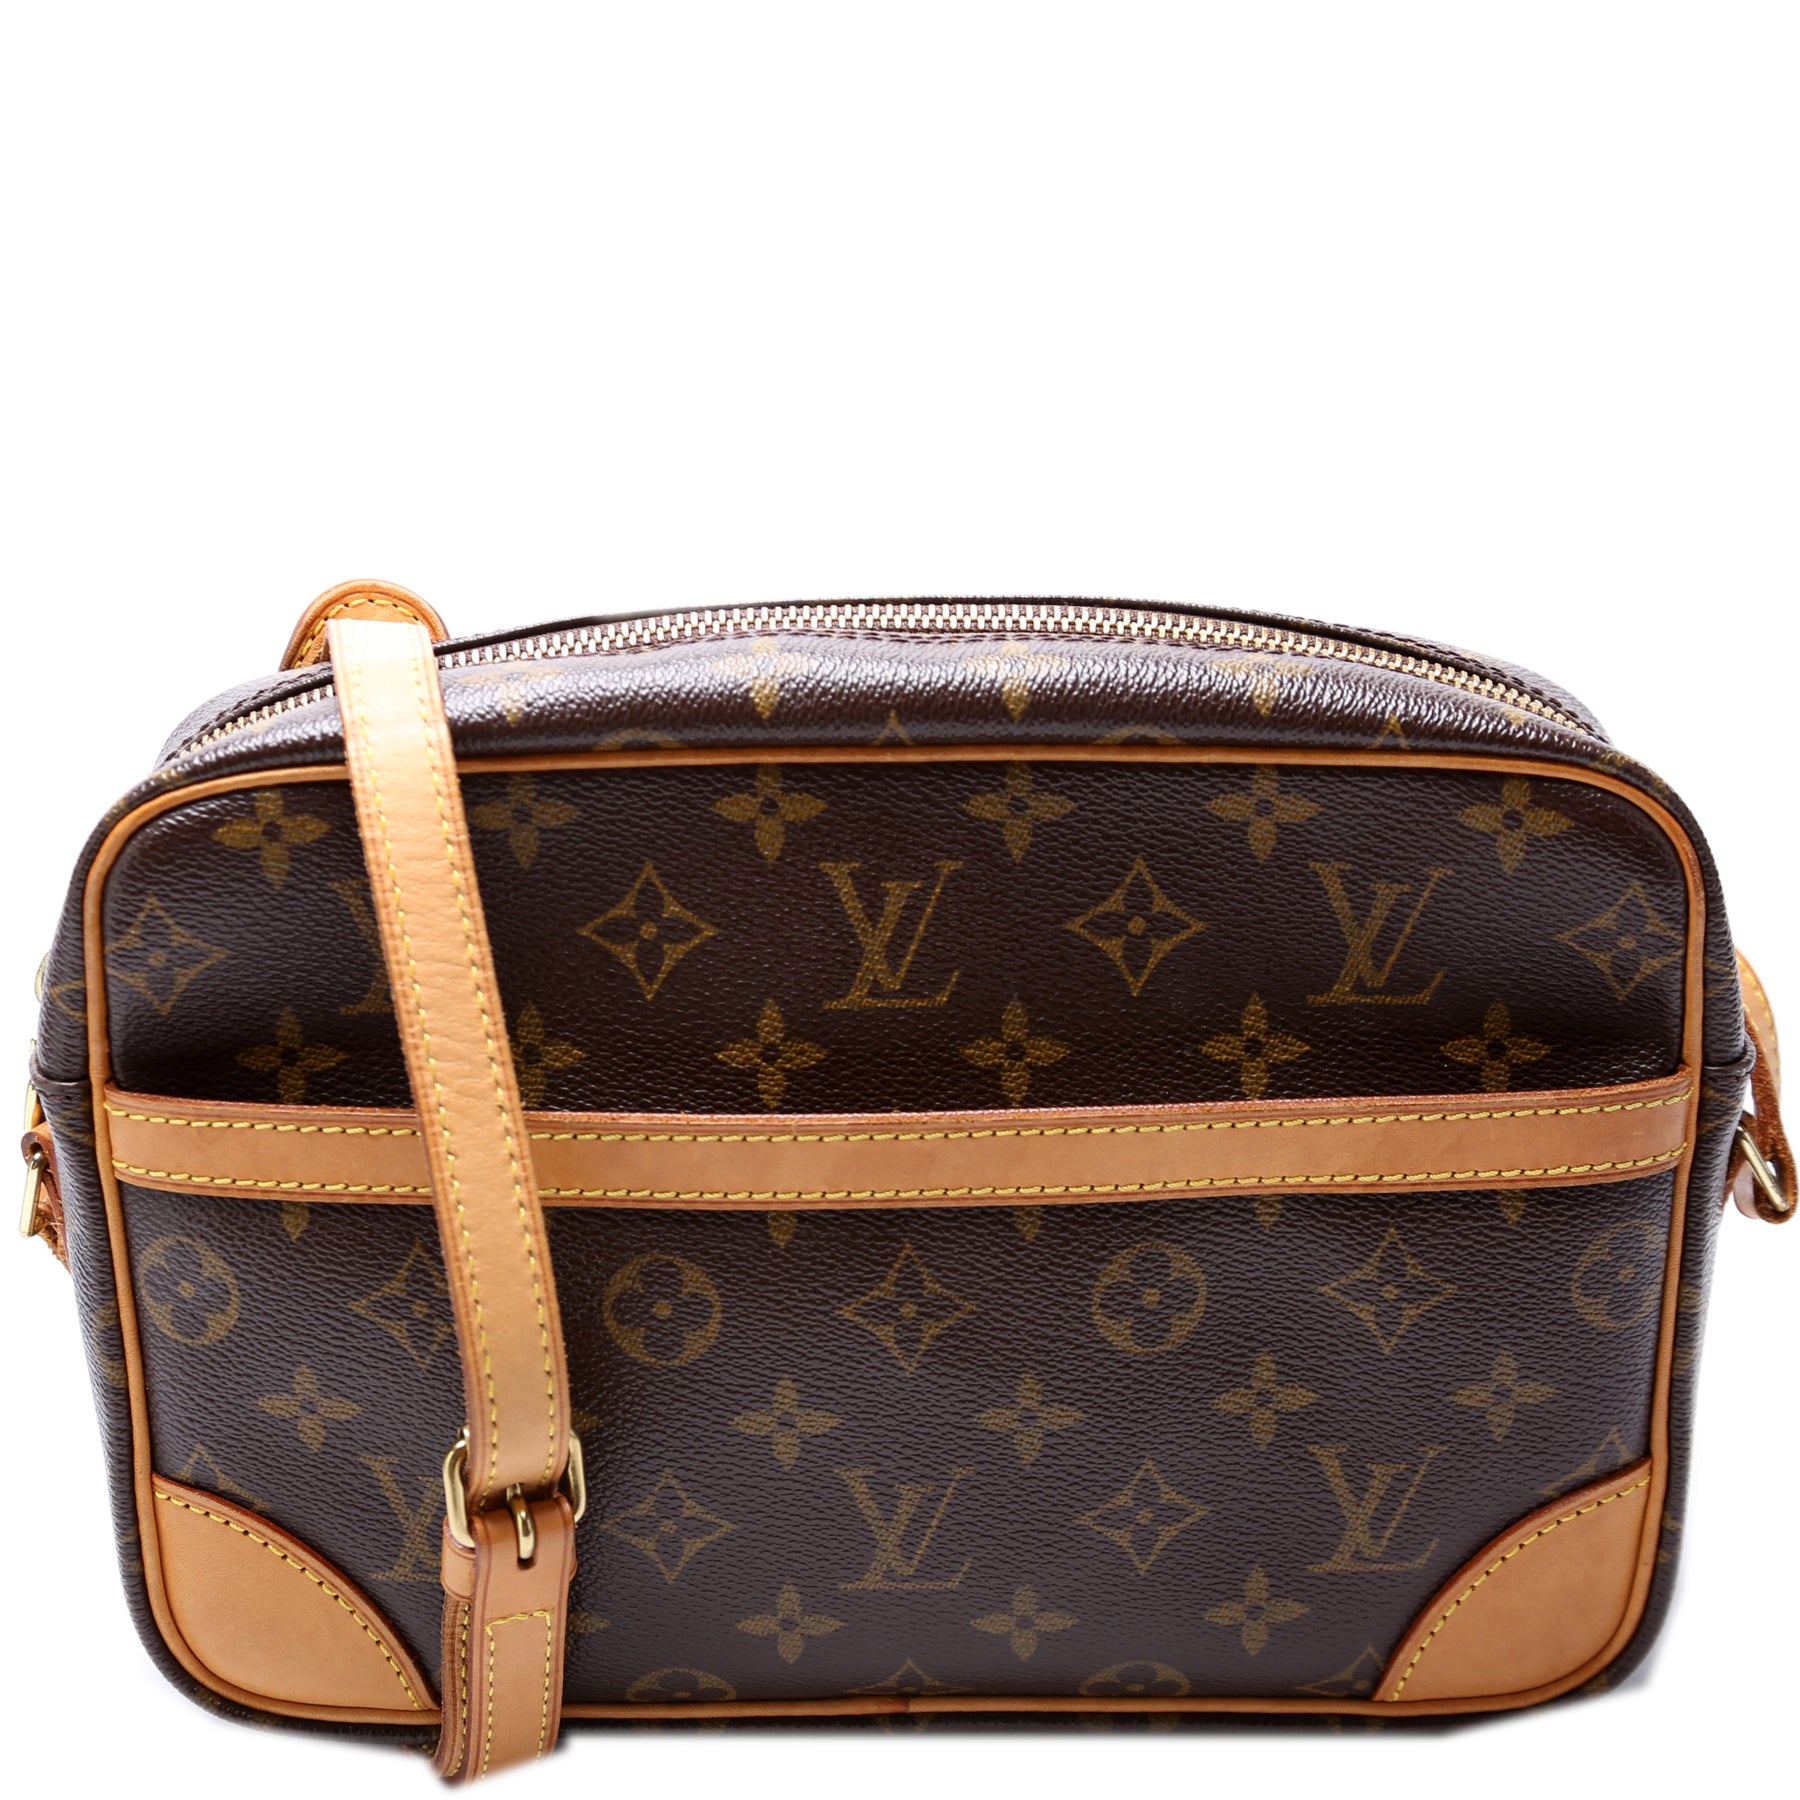 What's In My Bag: ODEON PM in Monogram Canvas - Wear & Tear / Review - MUST  HAVE LOUIS VUITTON BAG! 